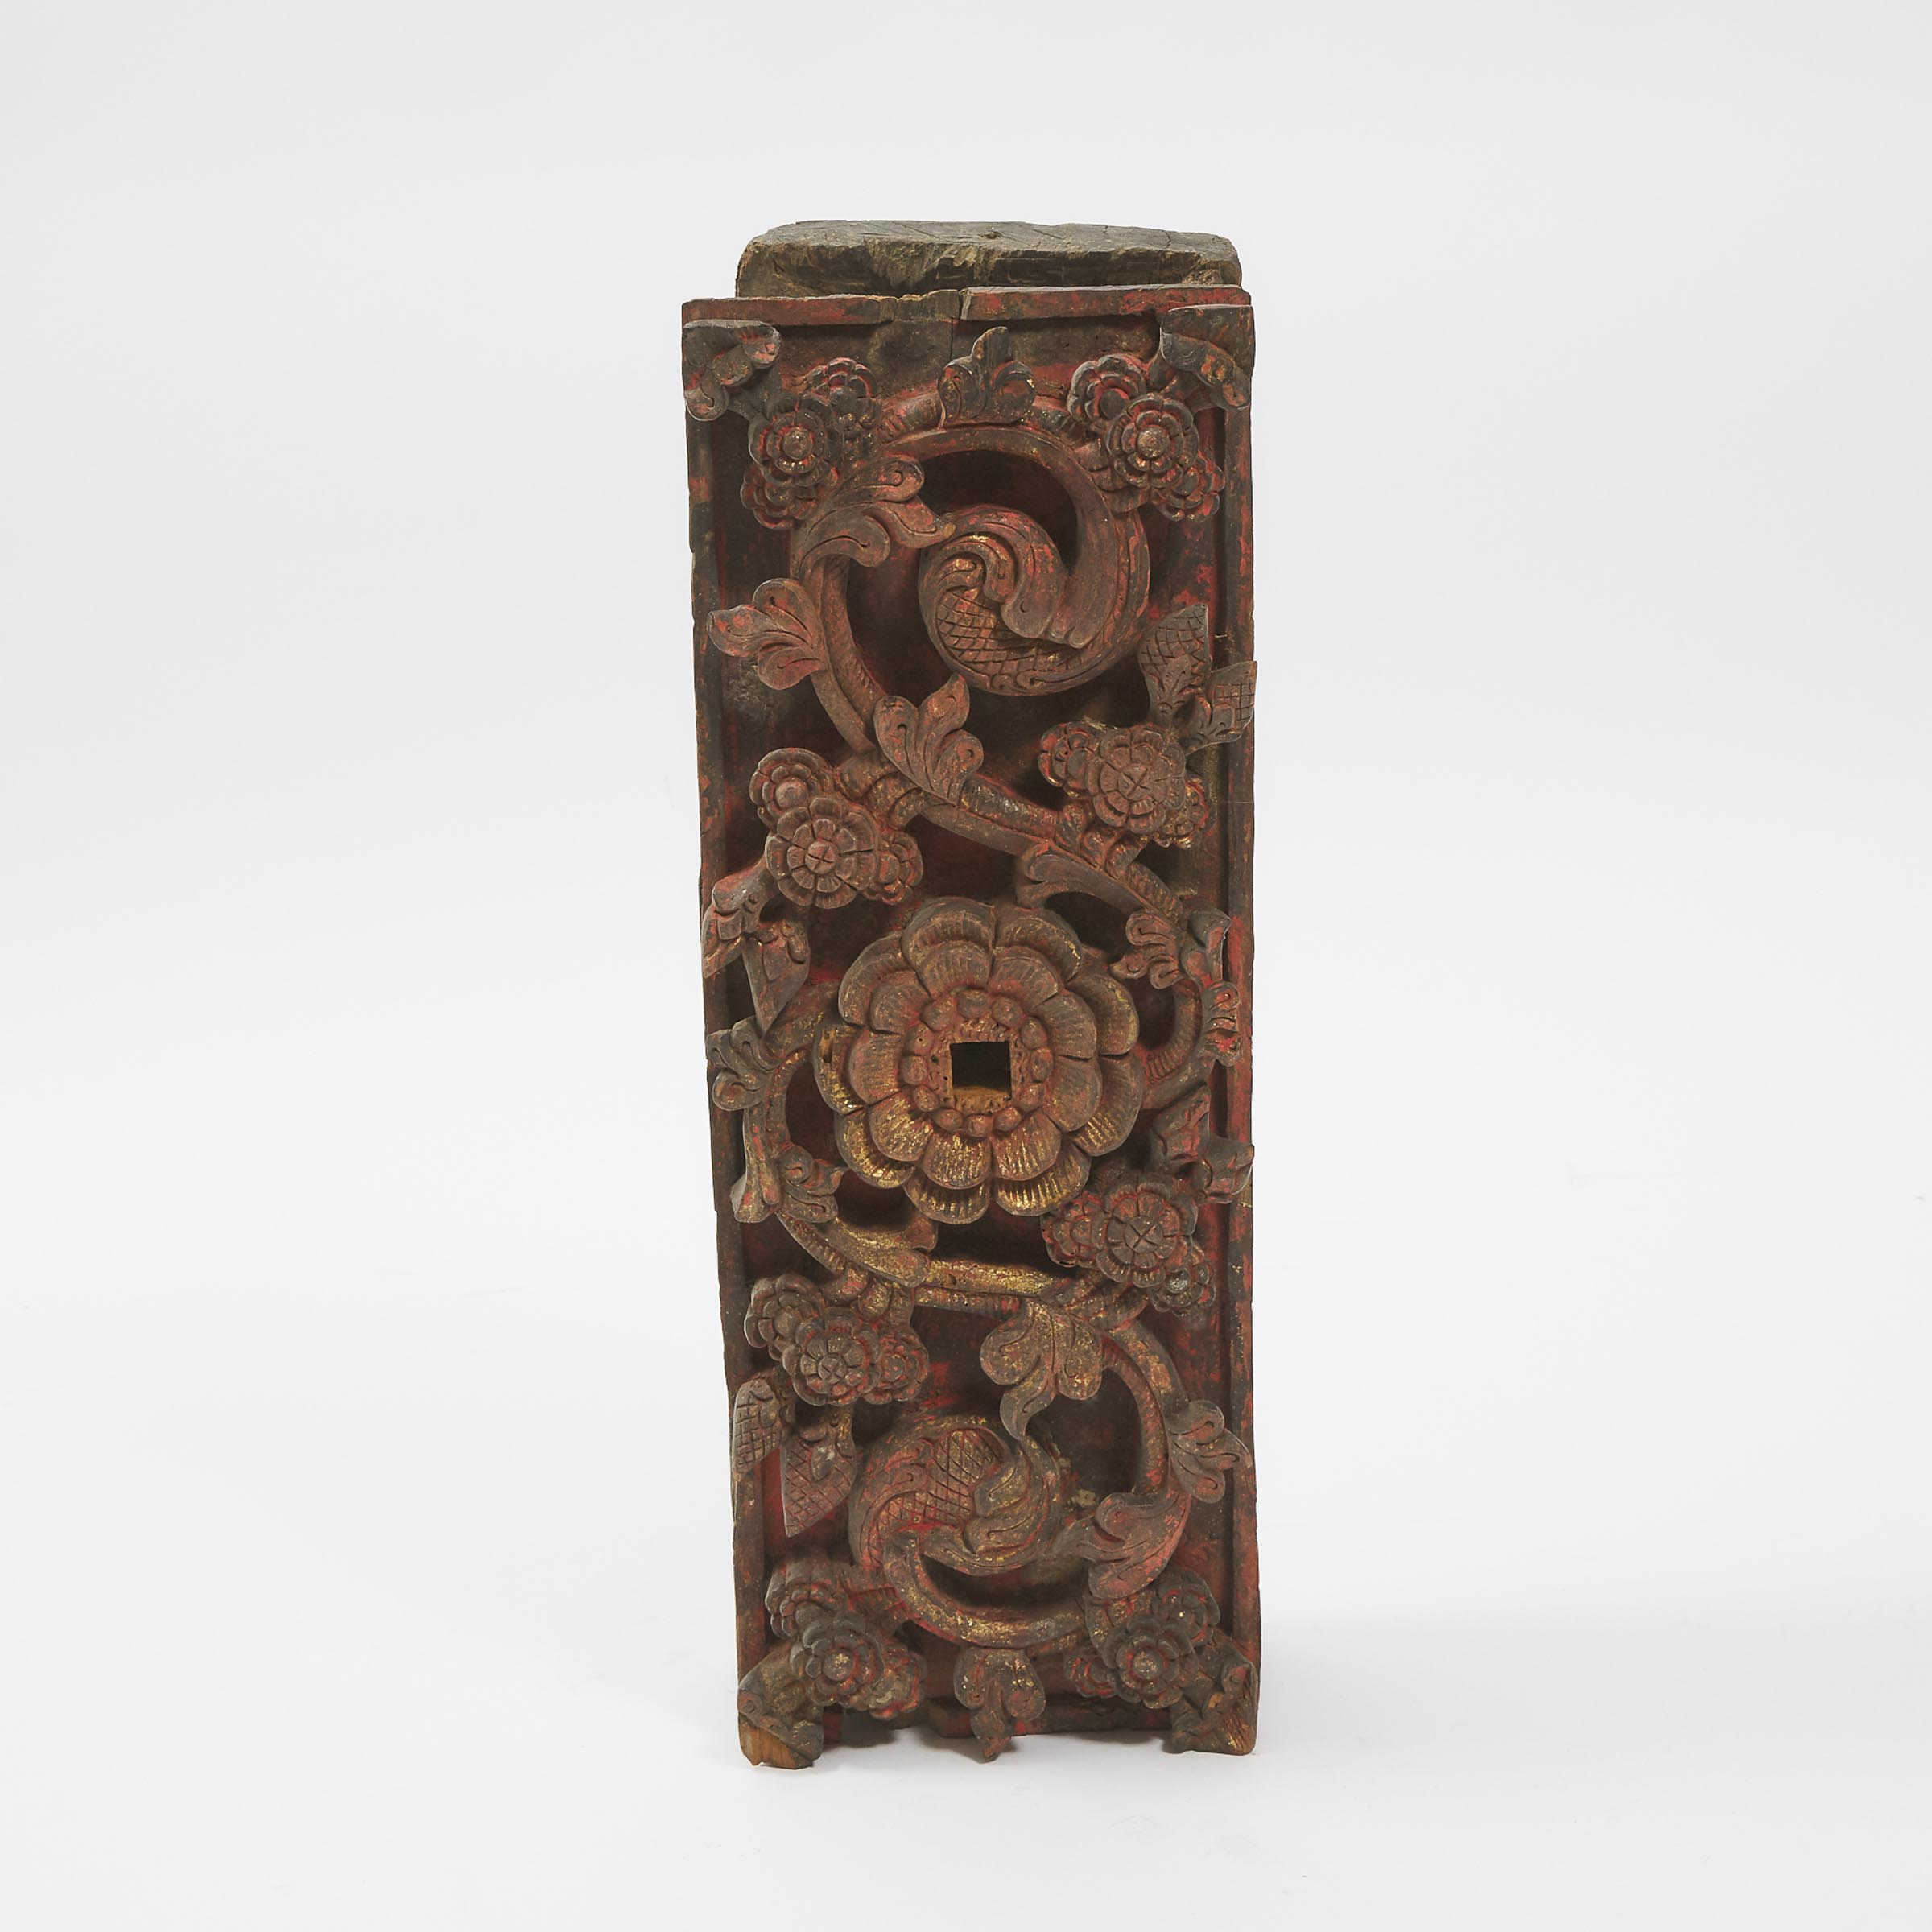 A Large Nepalese Gilt Polychrome Architectural 'Floral' Carving, 19th Century